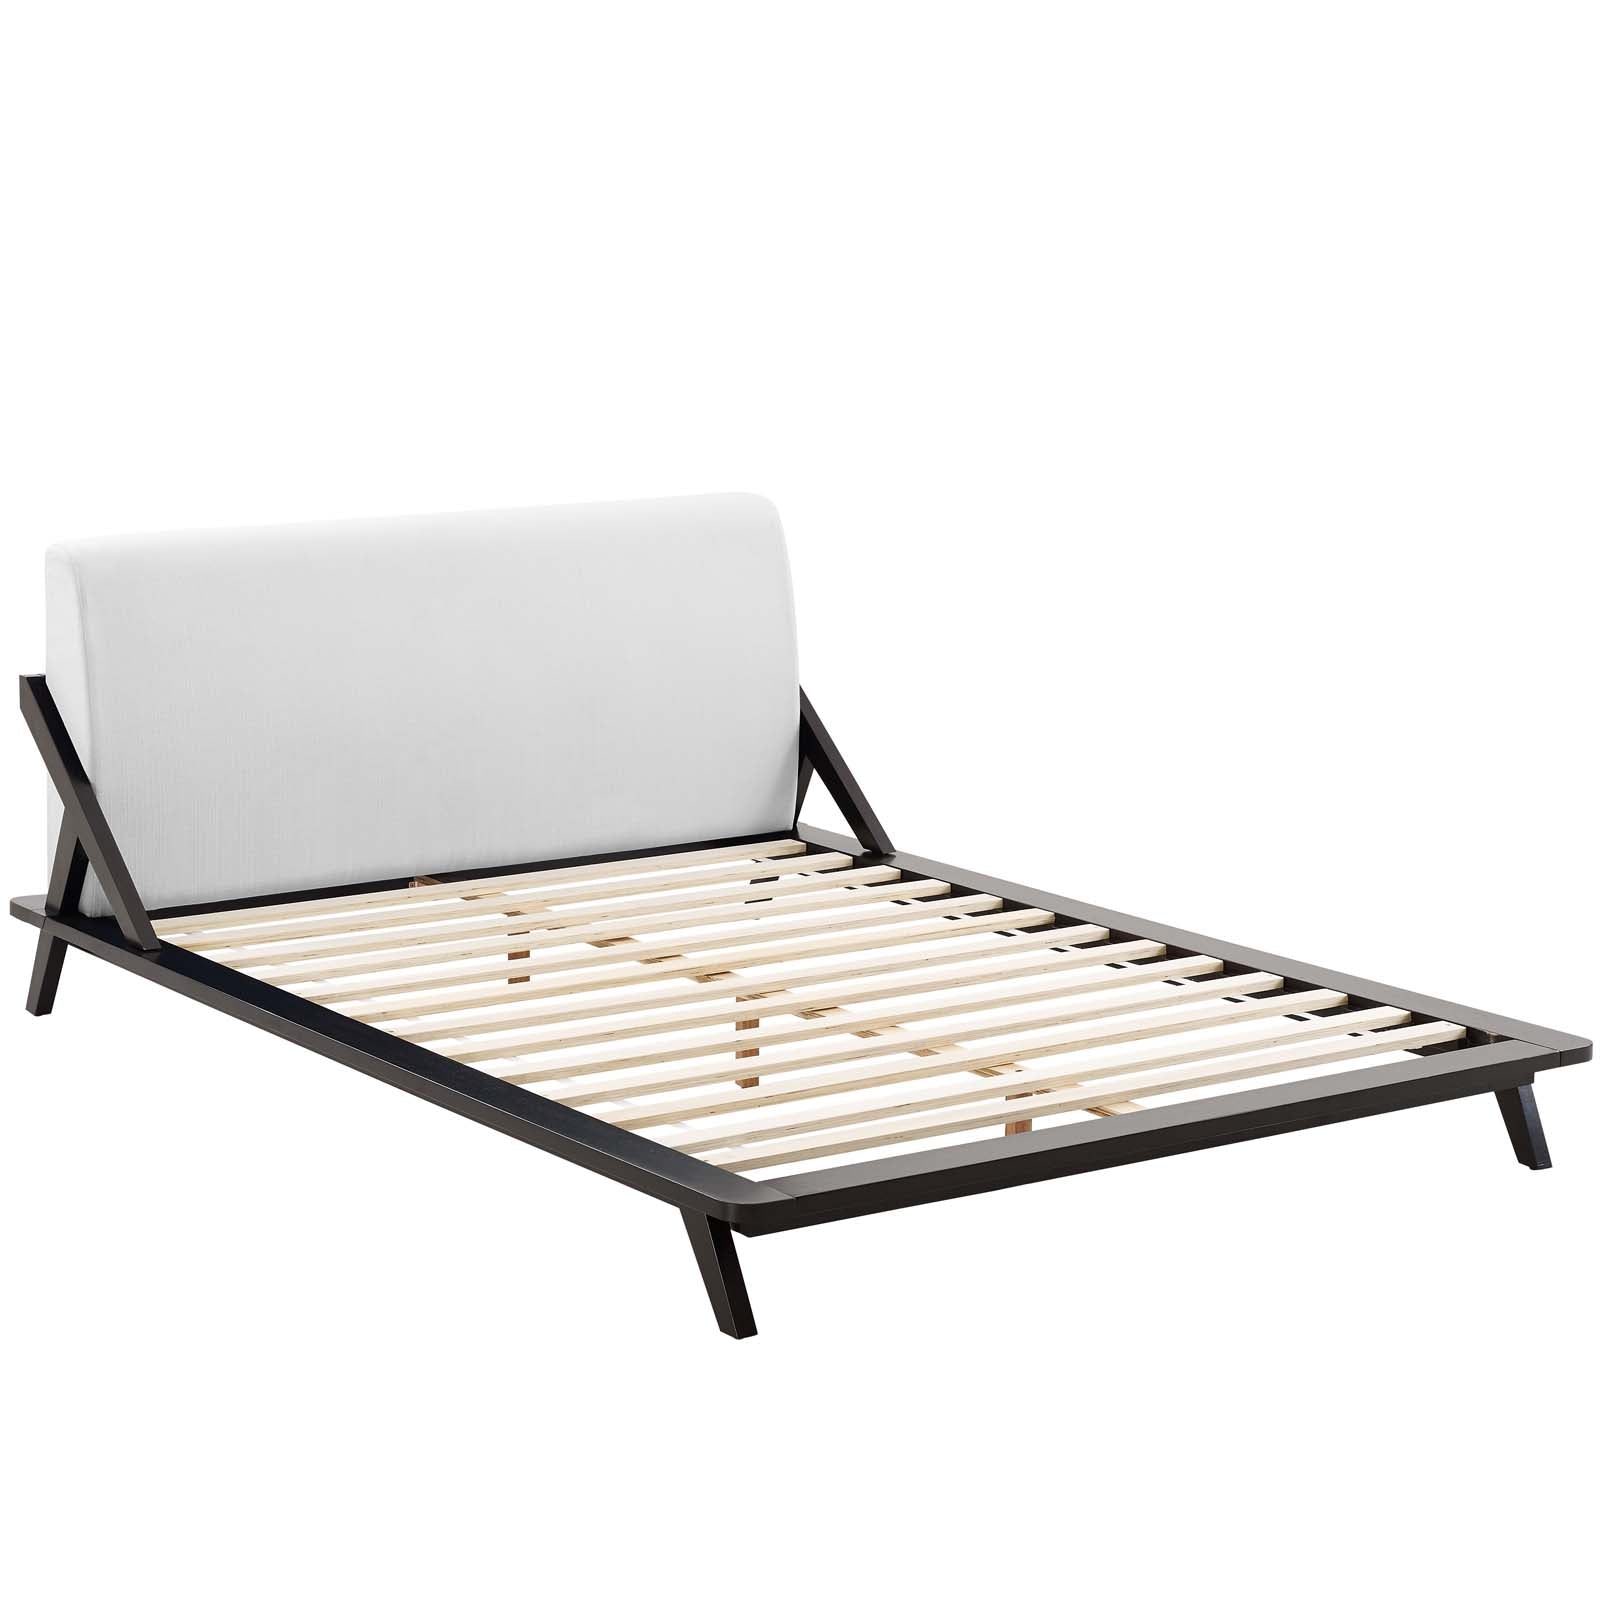 Modway Beds - Luella Queen Upholstered Fabric Platform Bed Cappuccino White